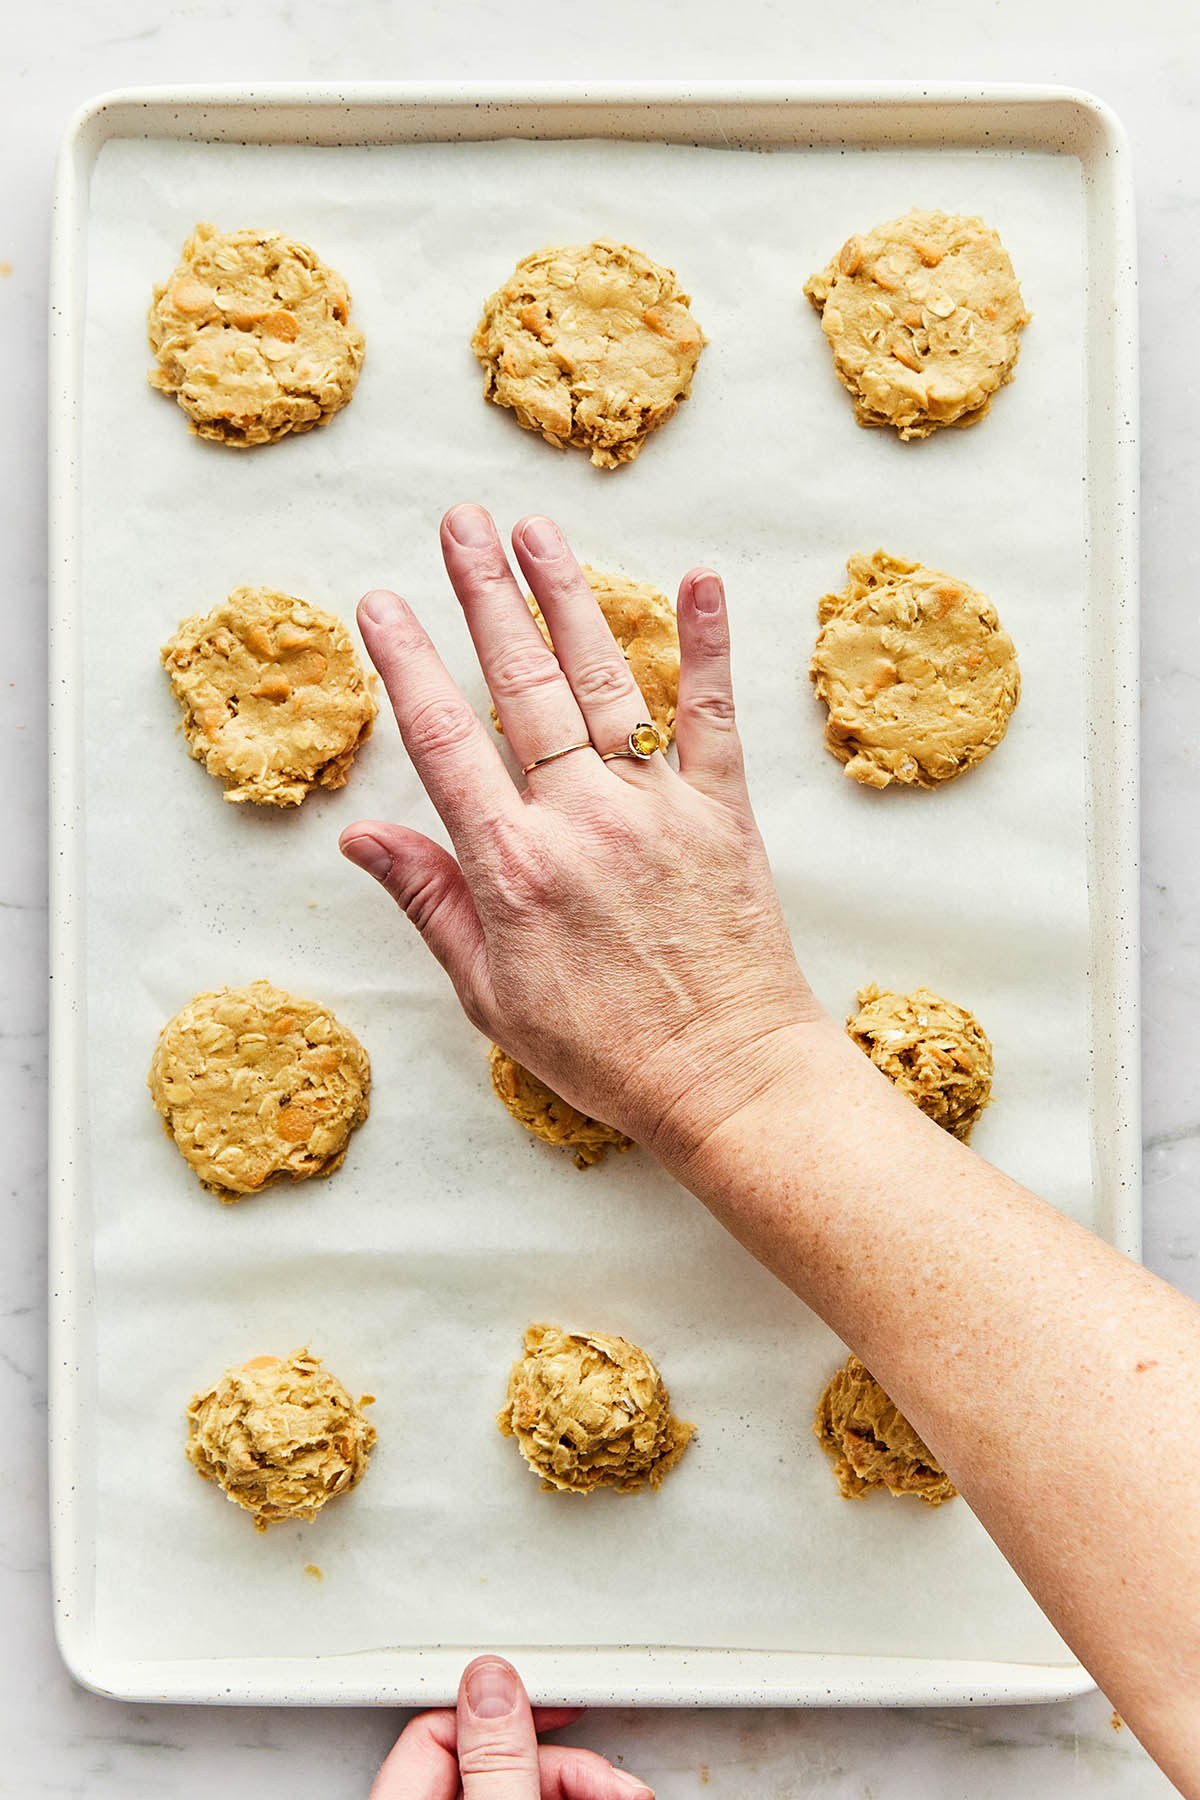 A hand flattening scoops of cookie dough on a baking sheet.